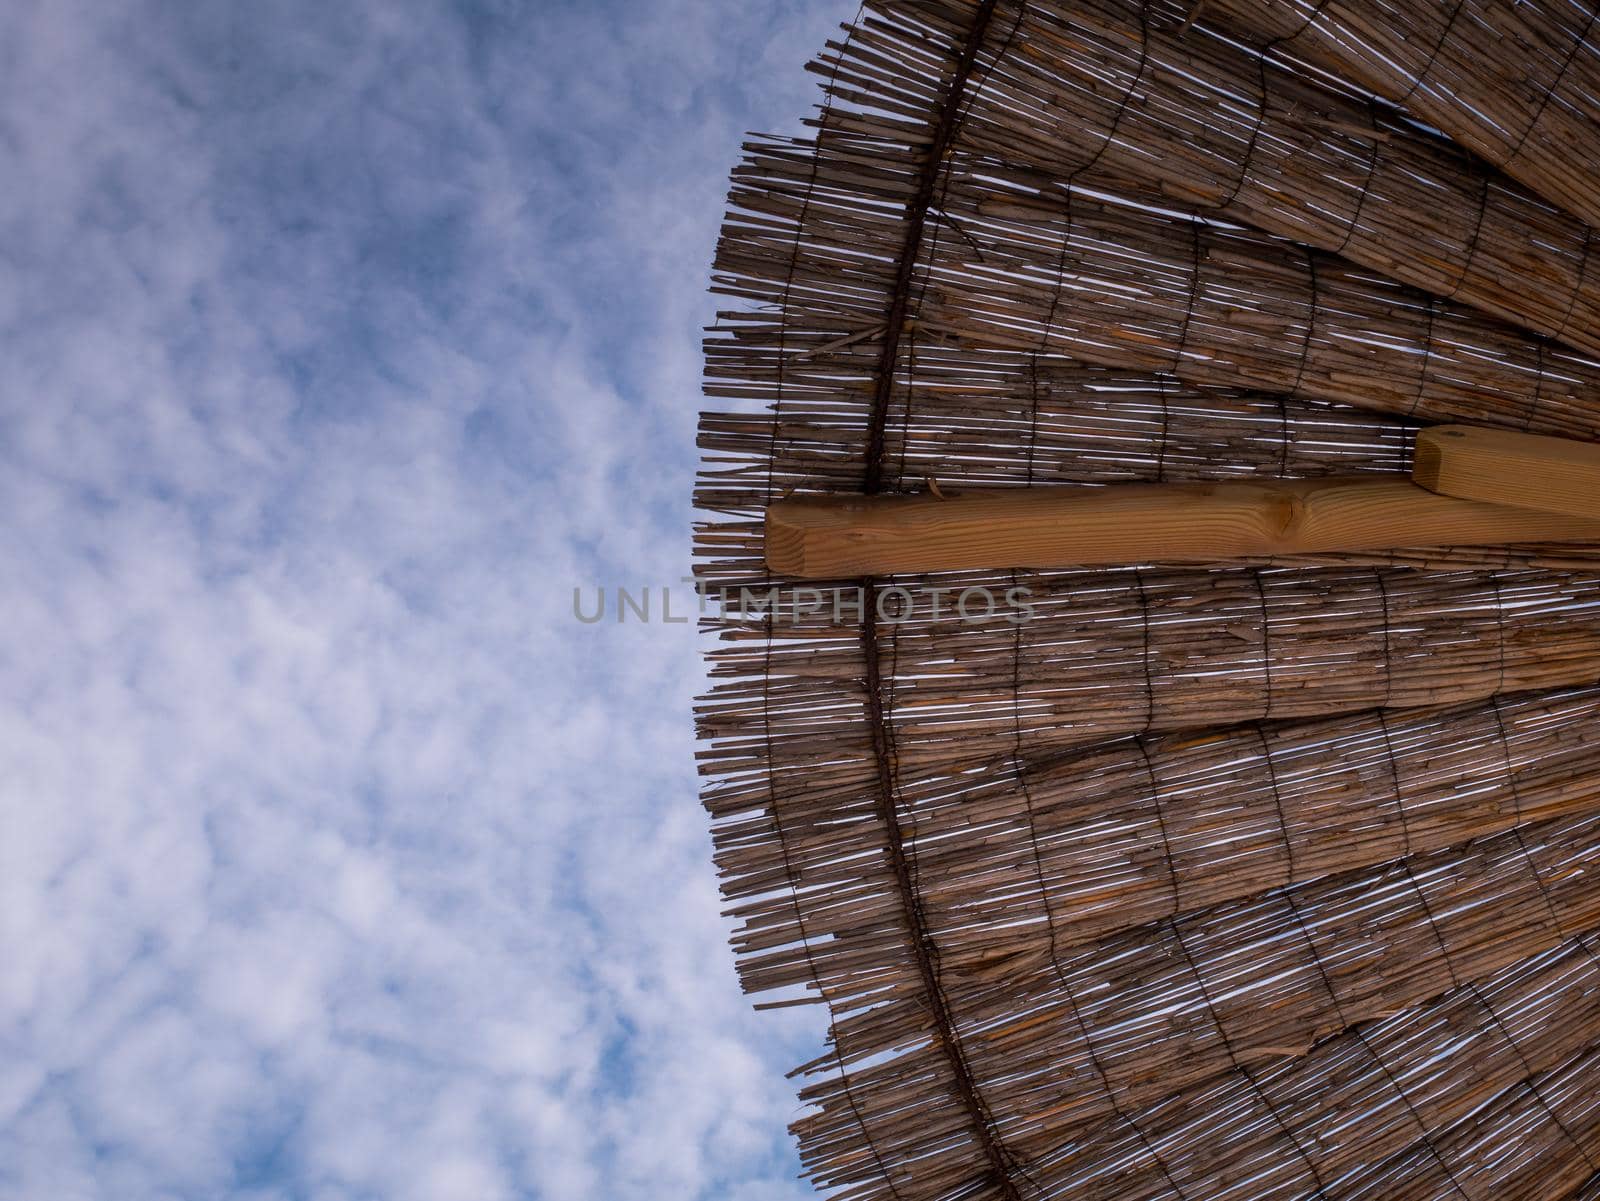 Part of the straw beach umbrellas and View of the beautiful blue sky with little clouds